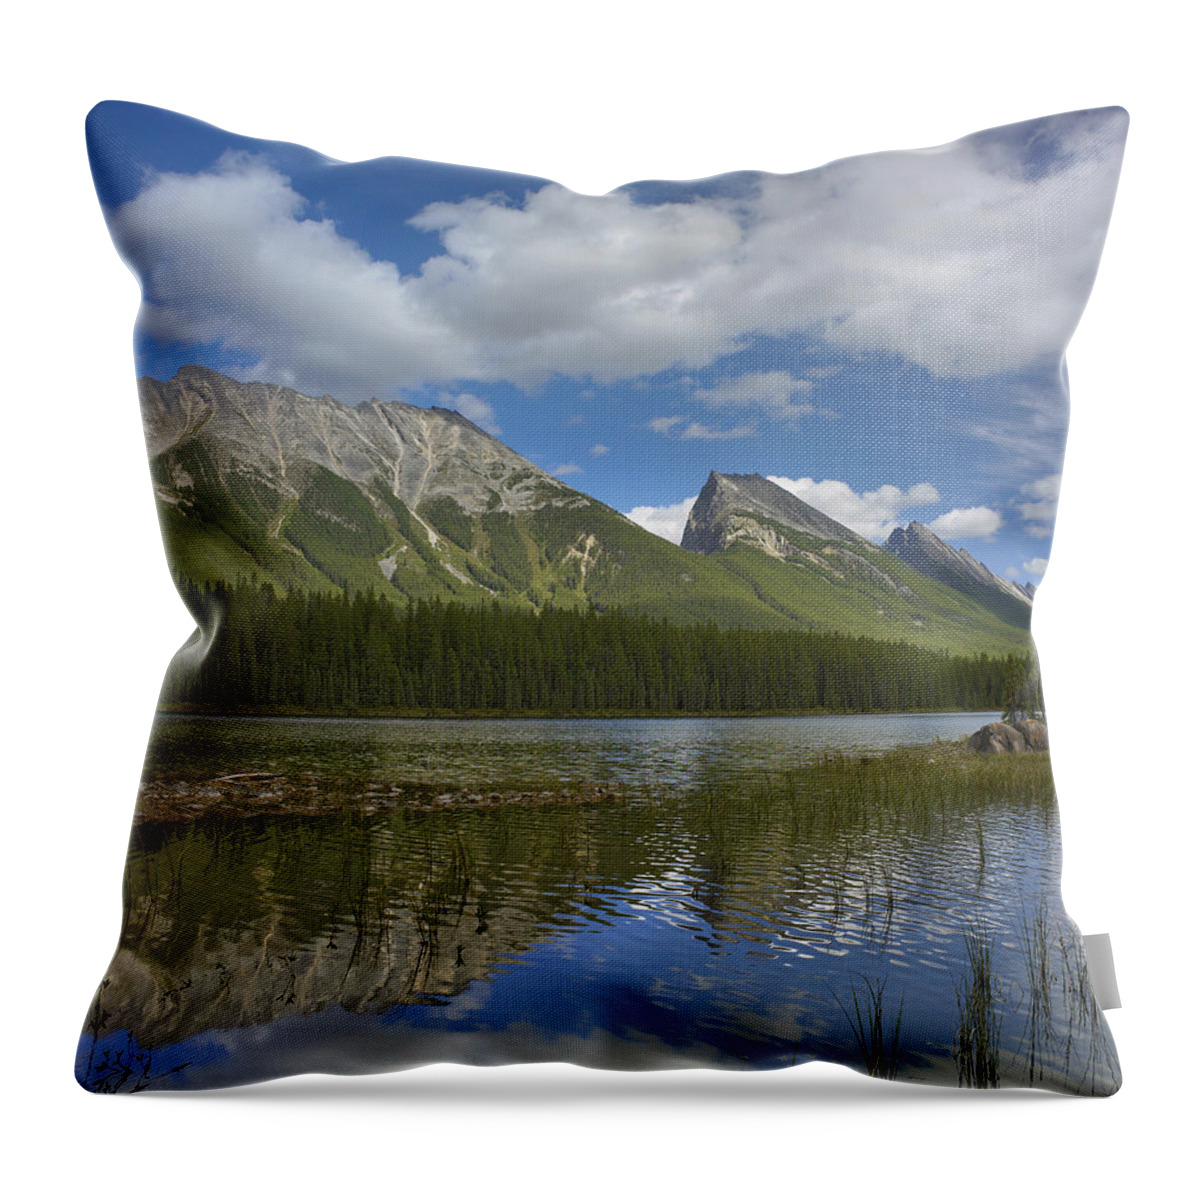 Feb0514 Throw Pillow featuring the photograph Endless Chain Ridge And Honeymoon Lake by Tim Fitzharris